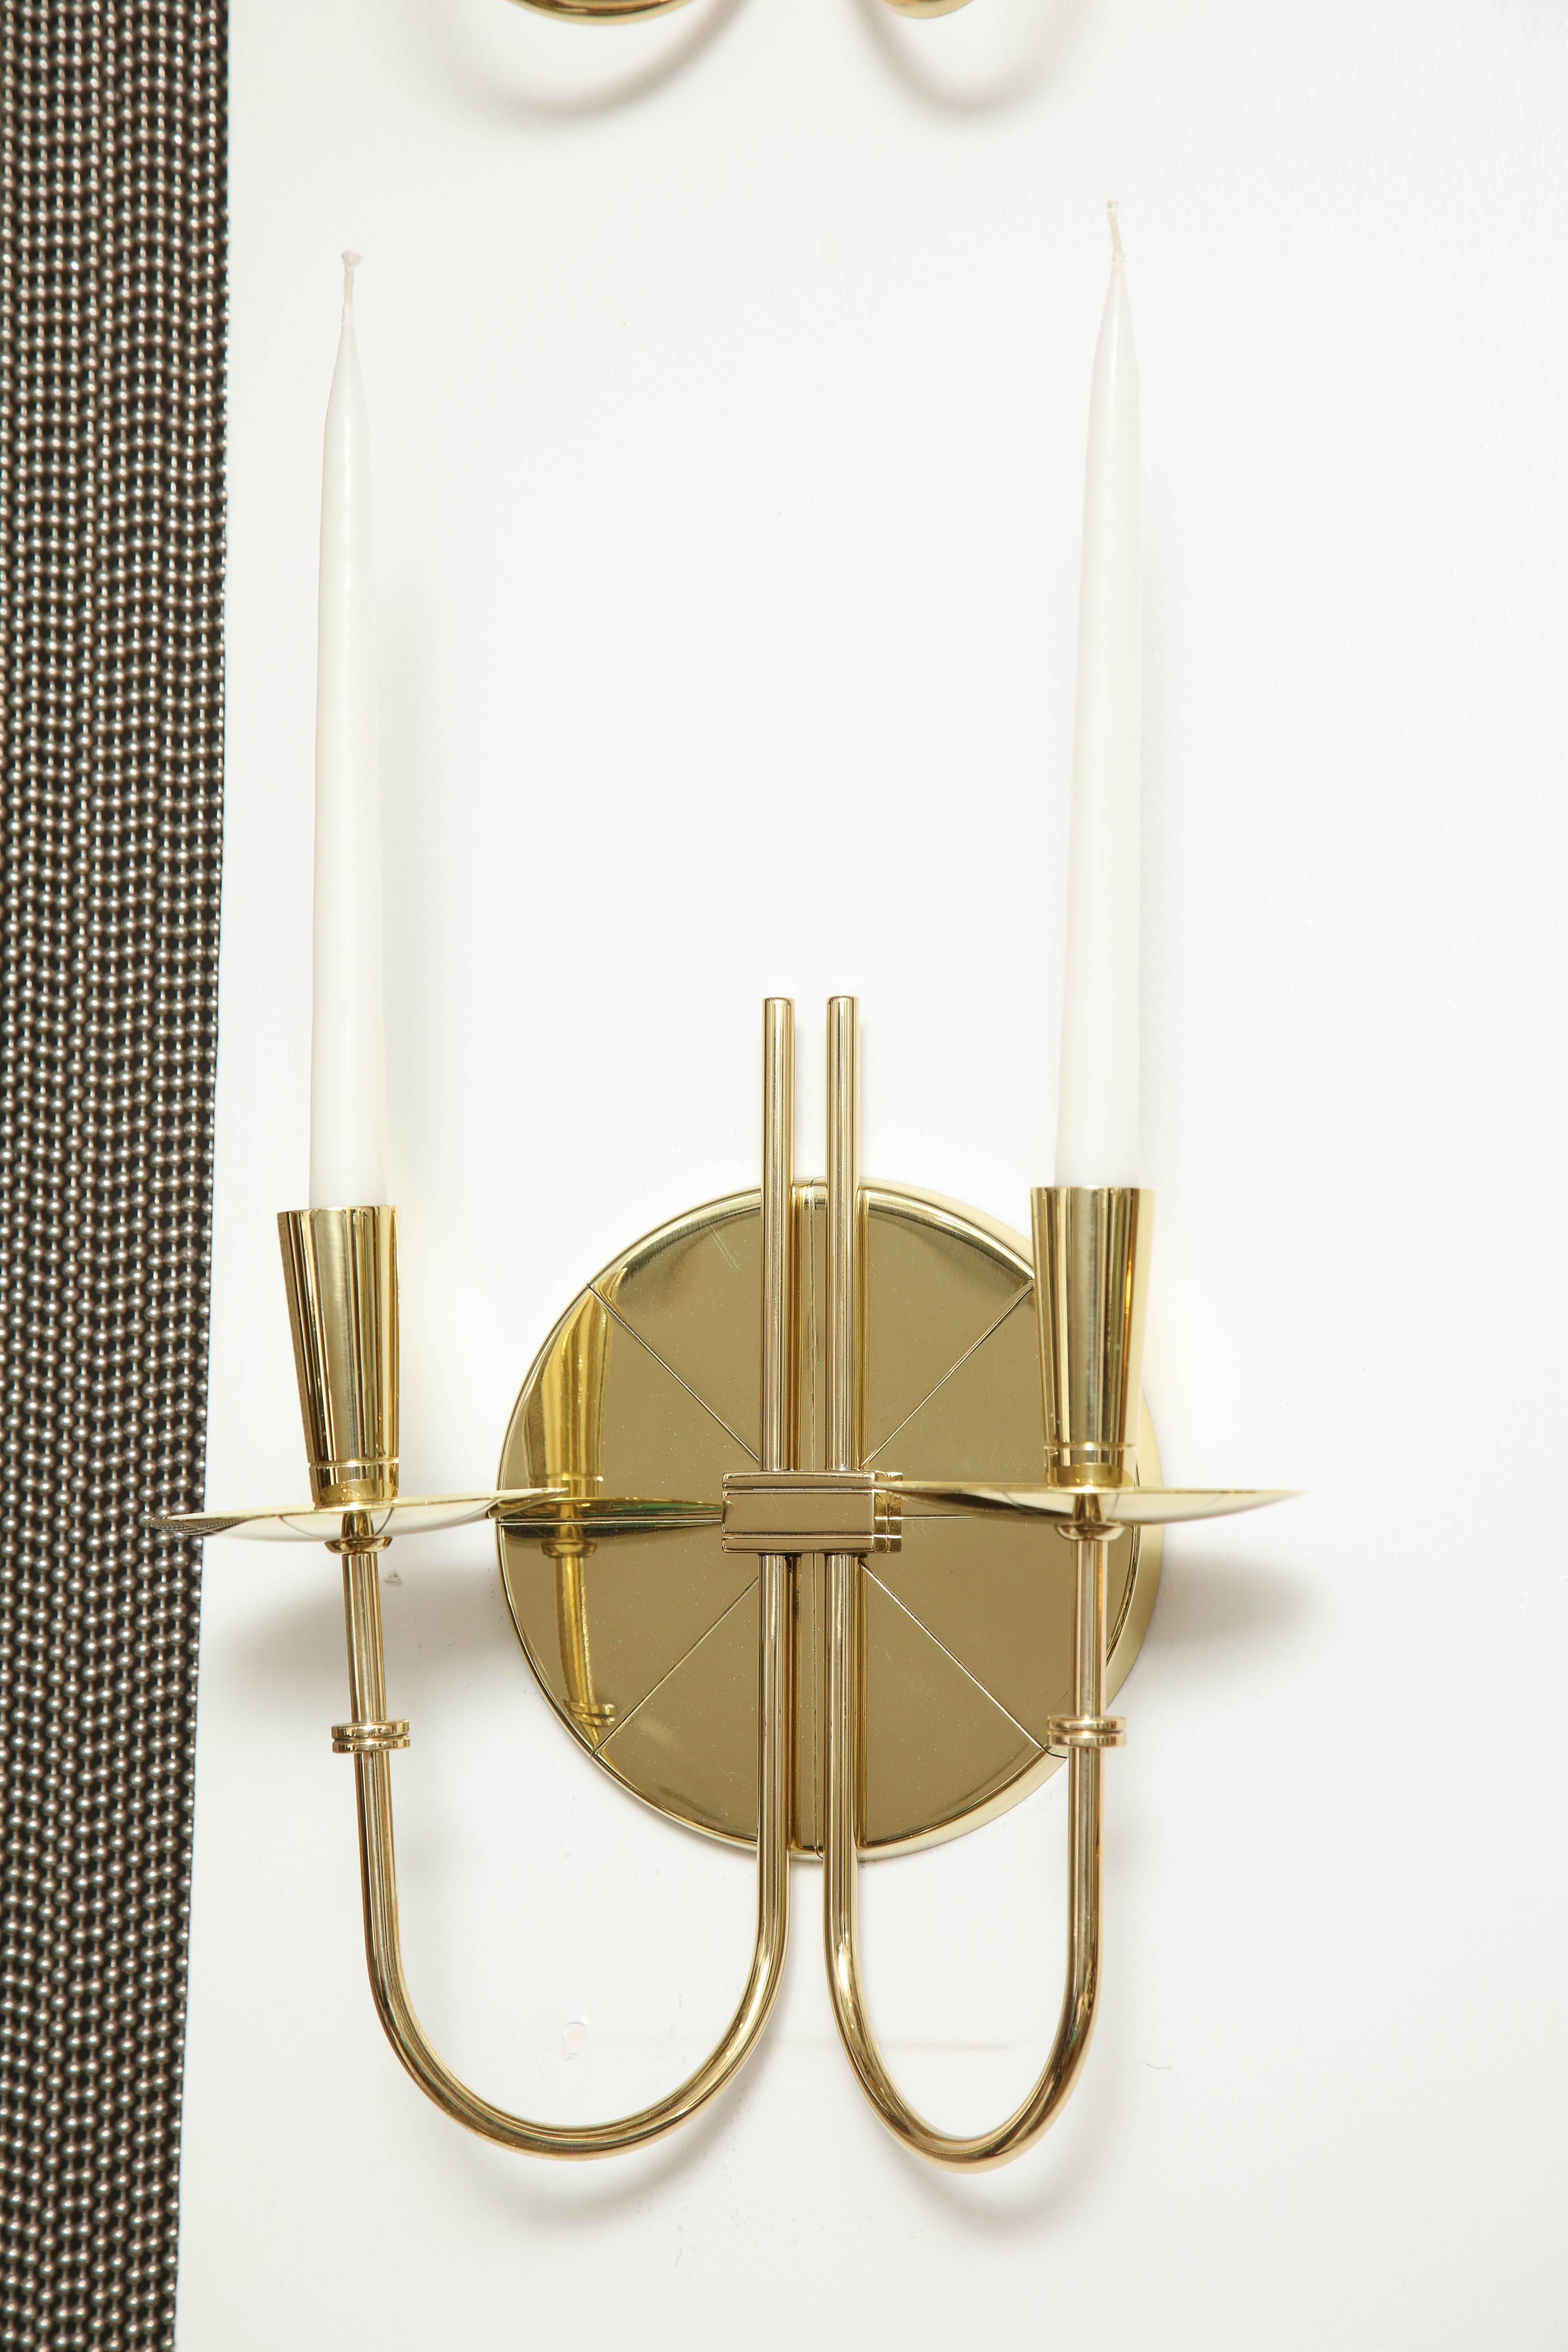 Pair of Mid-Century brass sconces with an etched circular back plate and two graceful arms. 